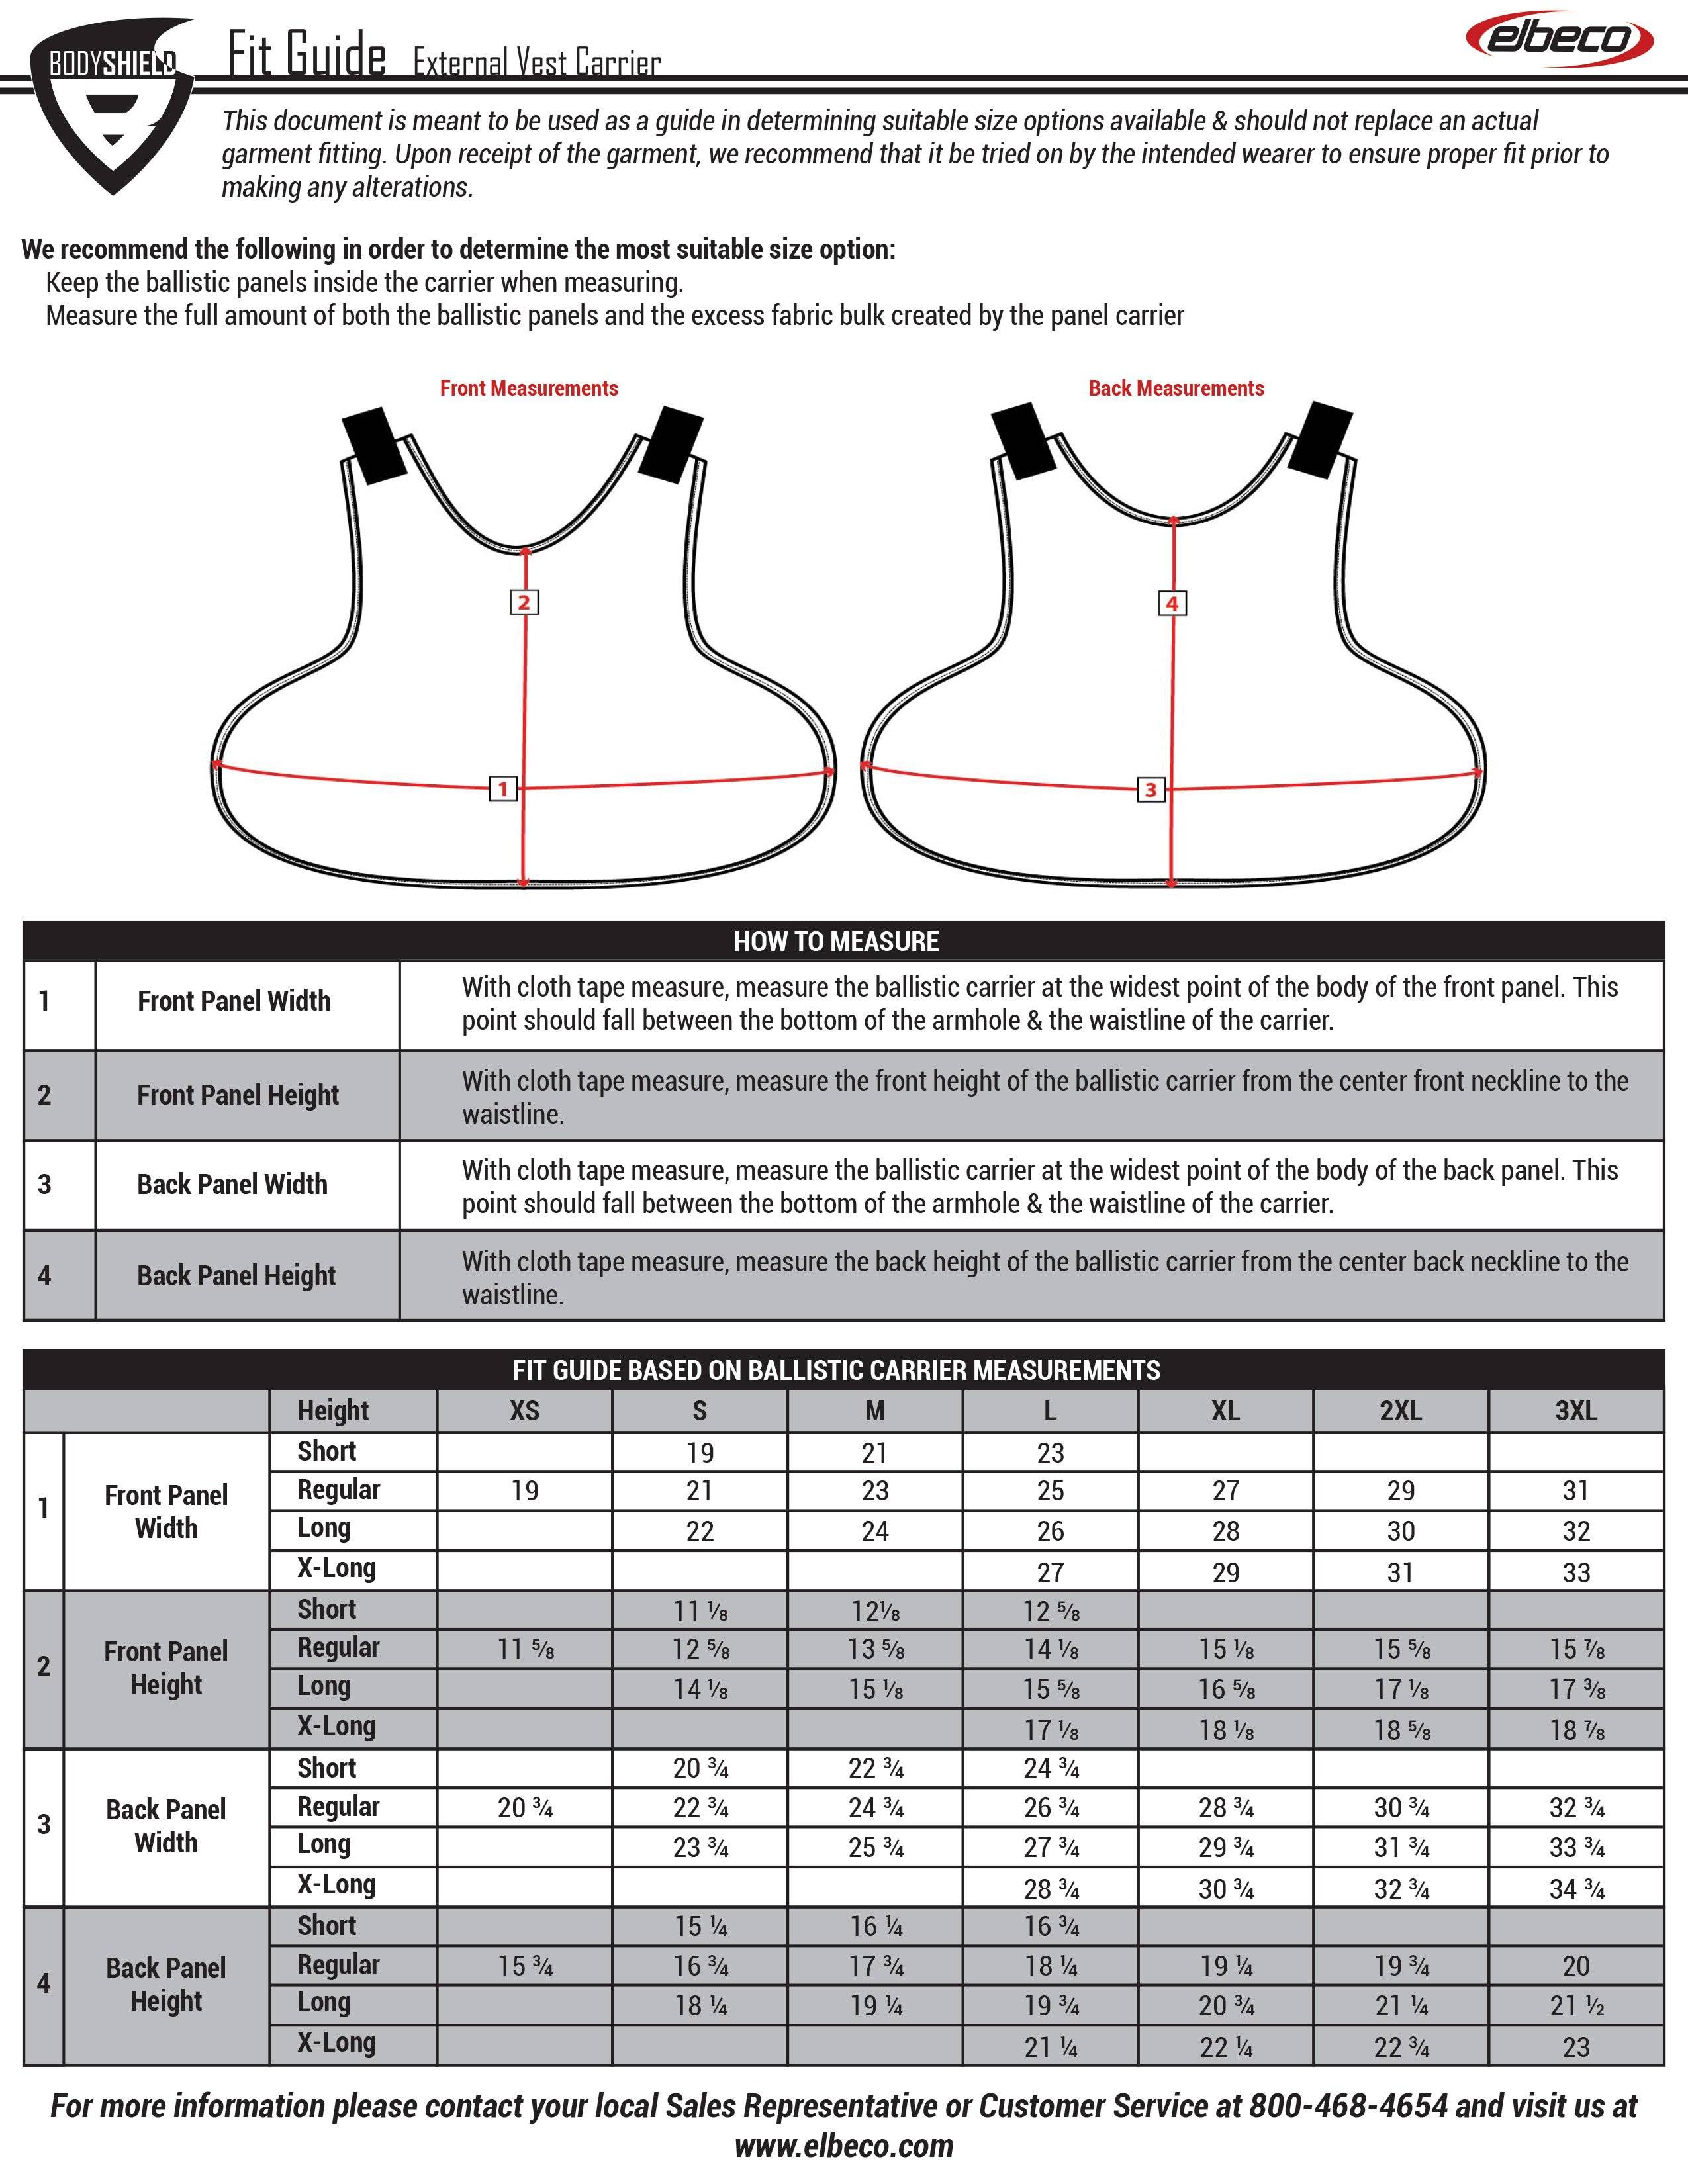 Under Armor Hoodie Size Chart